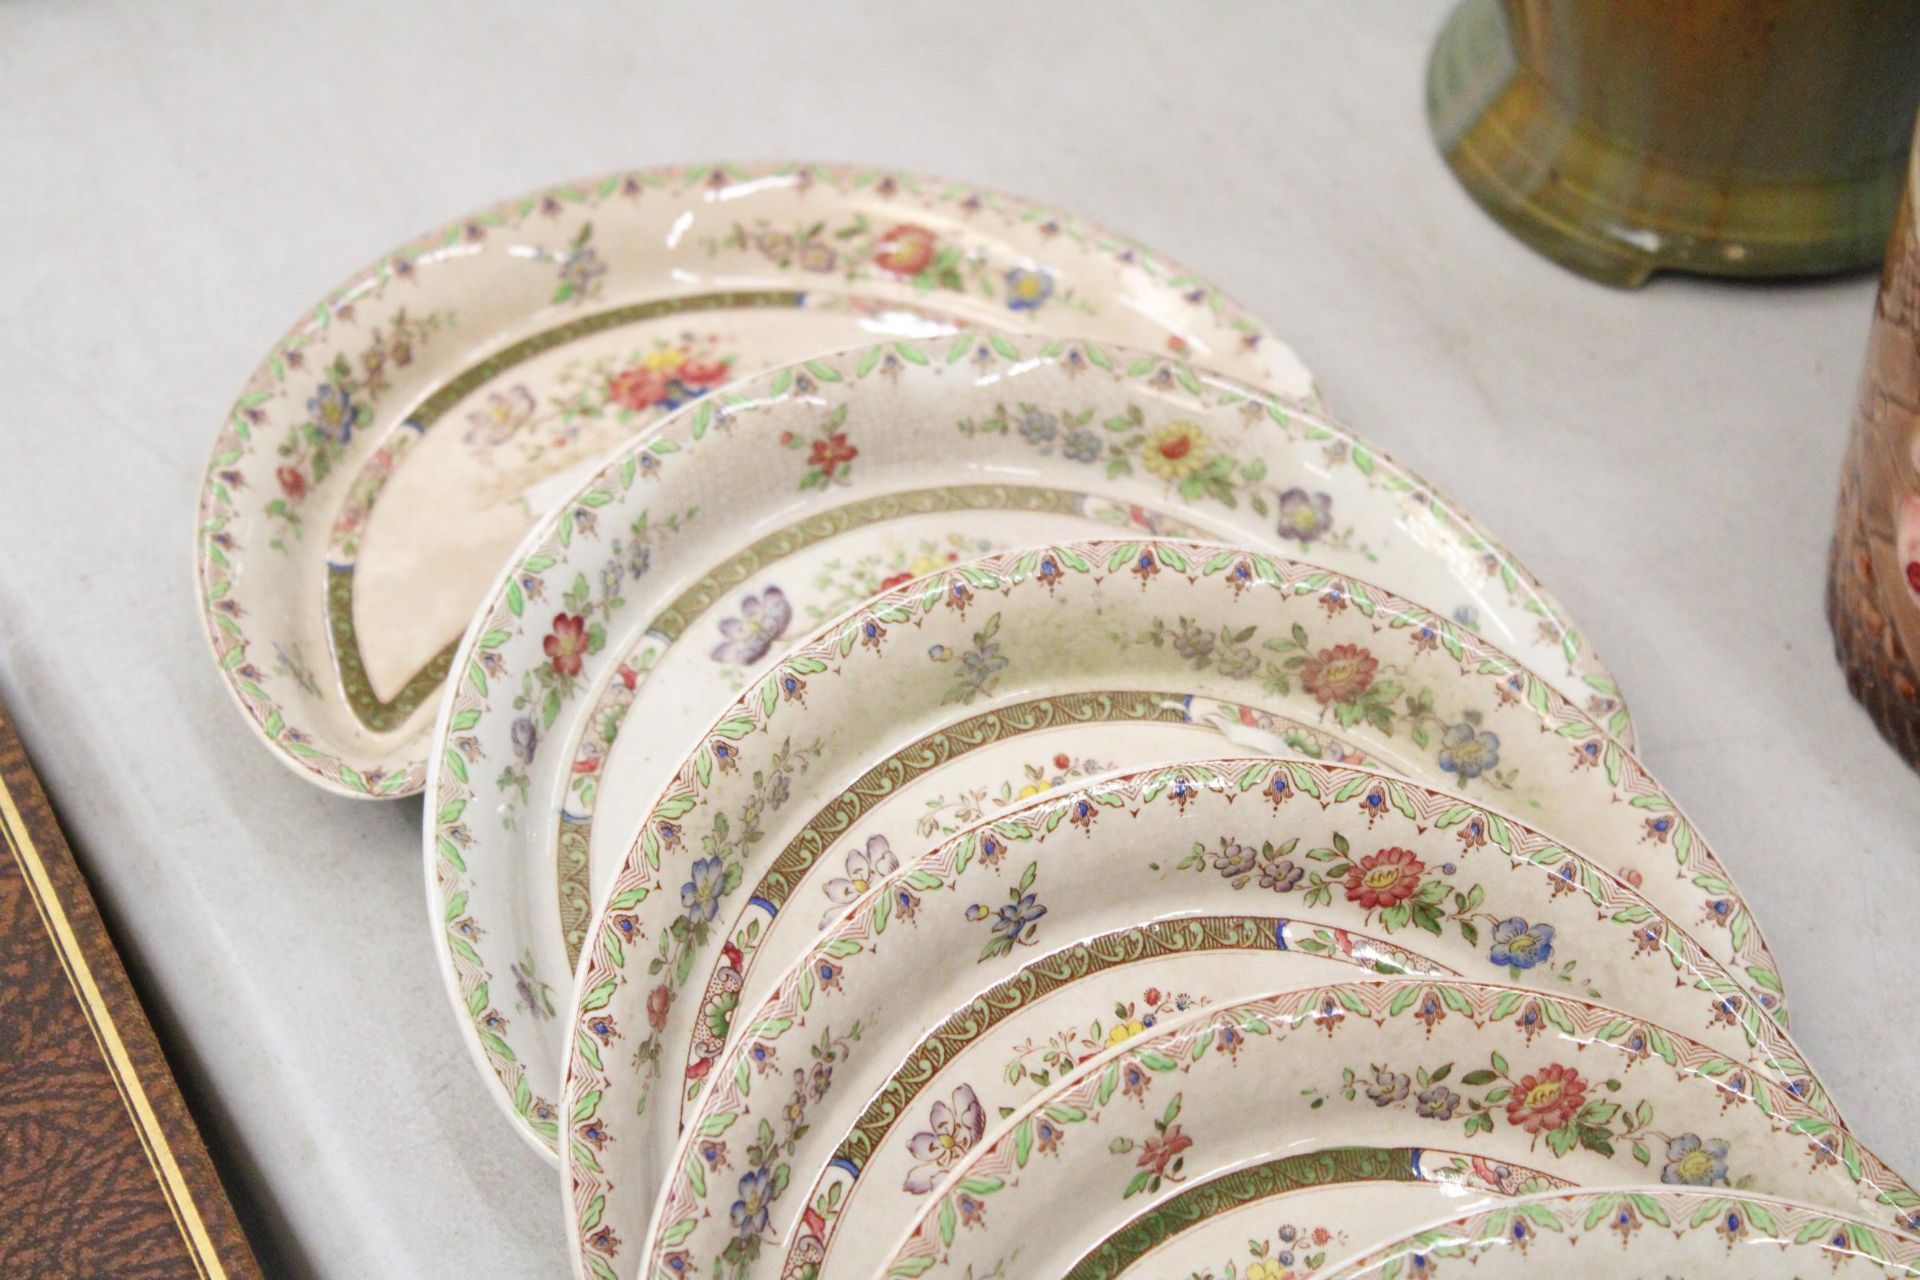 ELEVEN SPODE "COPELAND LATE - LYON" CRESCENT SHAPED PLATES - Image 5 of 5